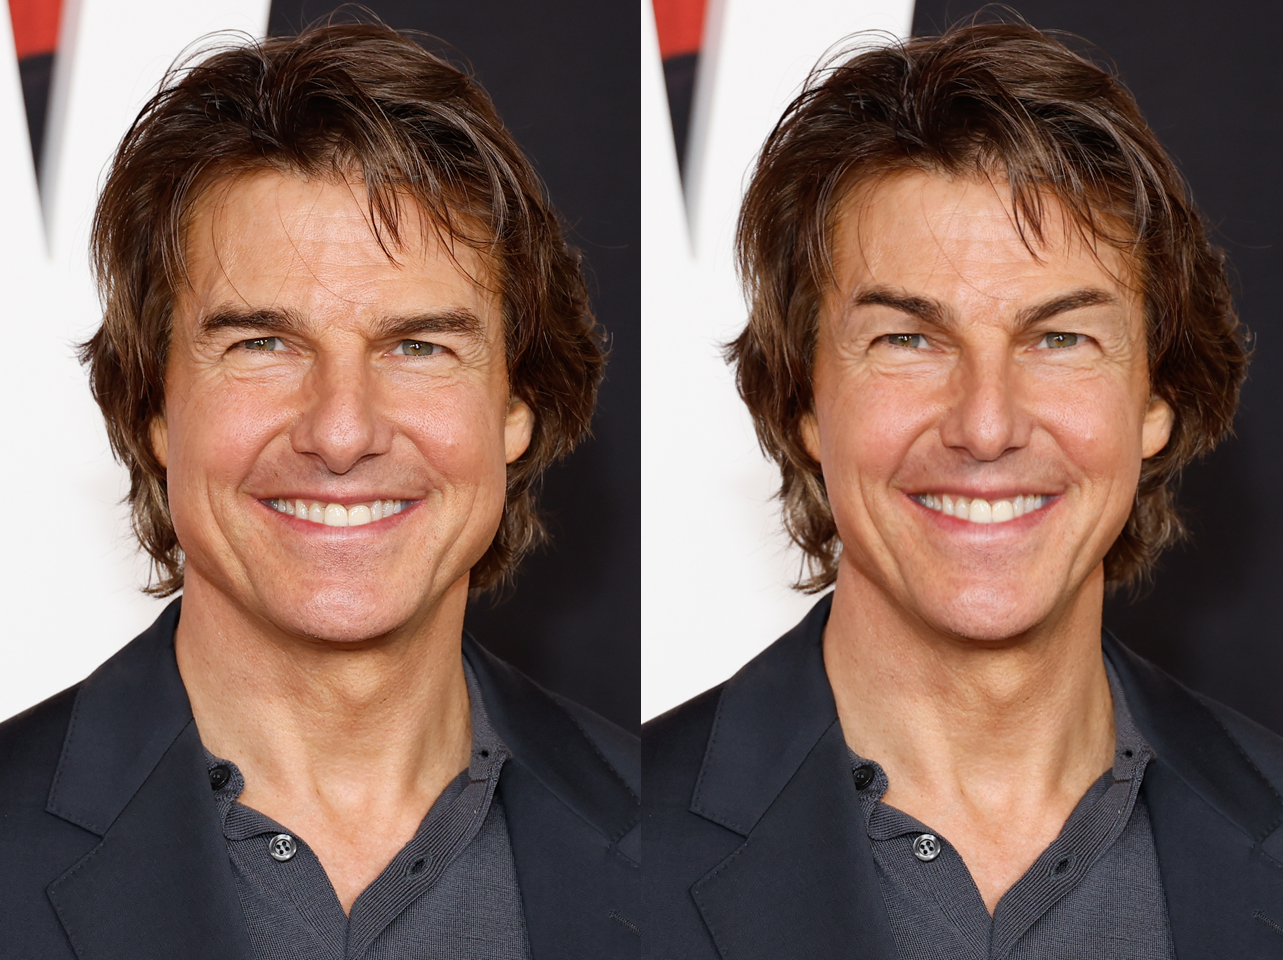 The real Tom Cruise vs Ideal self | Source: Getty Images